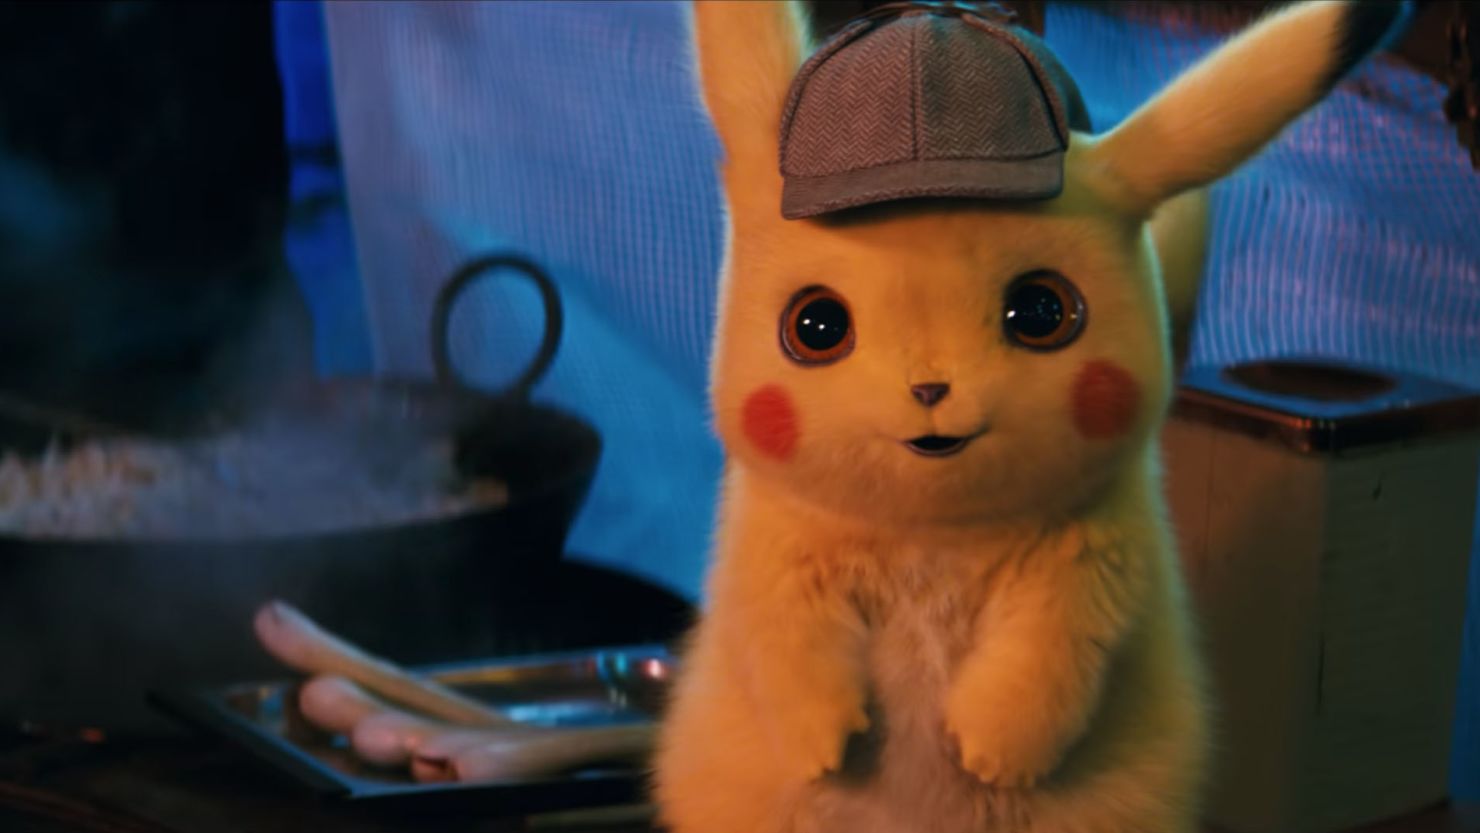 A still from the trailer for "Pokémon: Detective Pikachu," due out in May 2019.